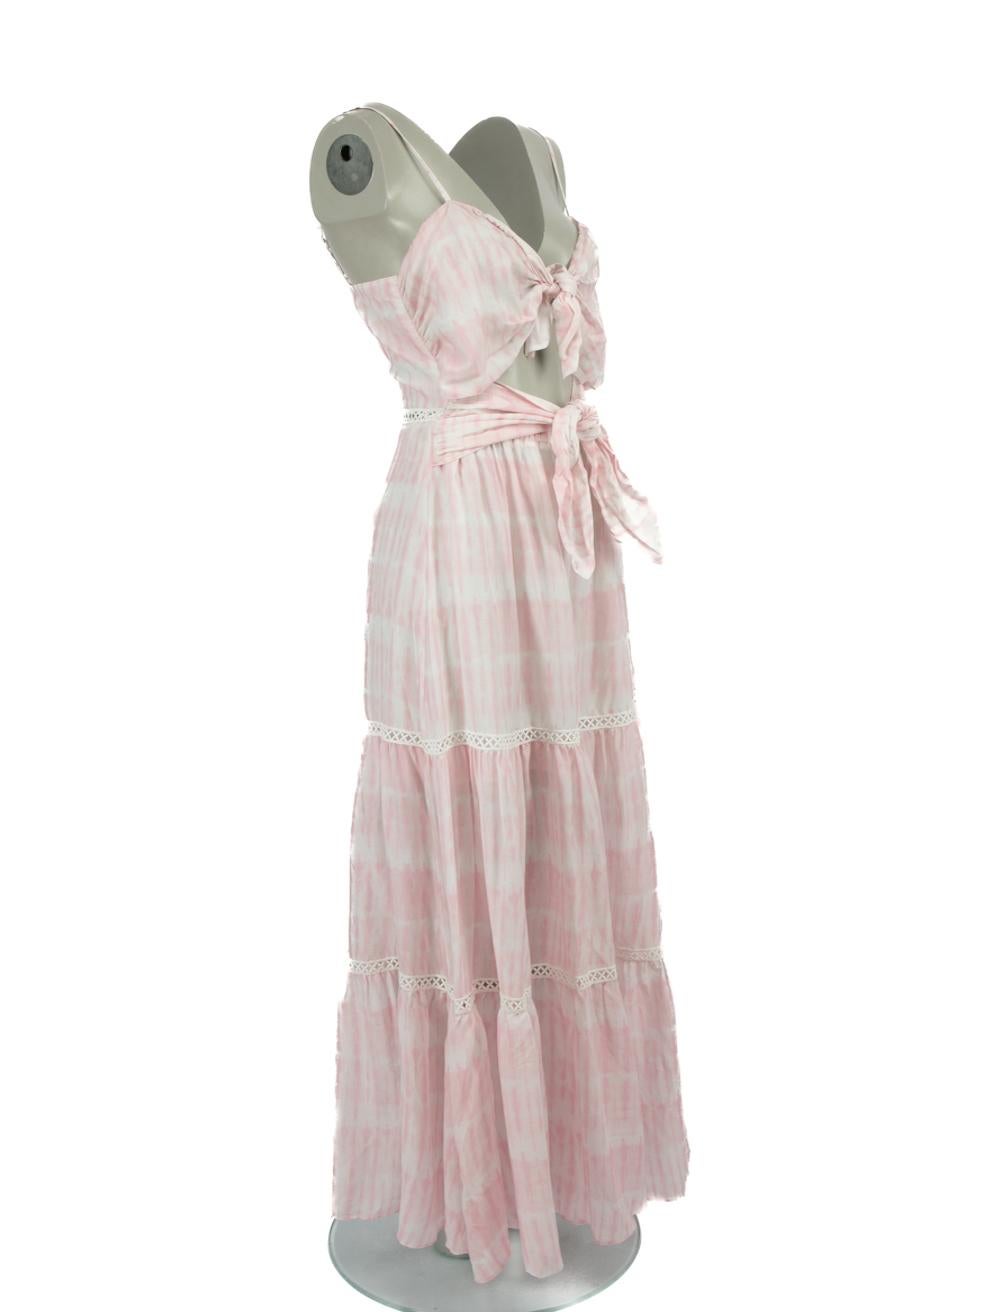 CONDITION is Never worn, with tags. No visible wear to dress is evident on this new Jonathan Simkhai designer resale item.

Details
Pink
Tencel
Maxi dress
Tie-dye pattern
Sleeveless
Square neck
Open back
Back tie detail
Made in China